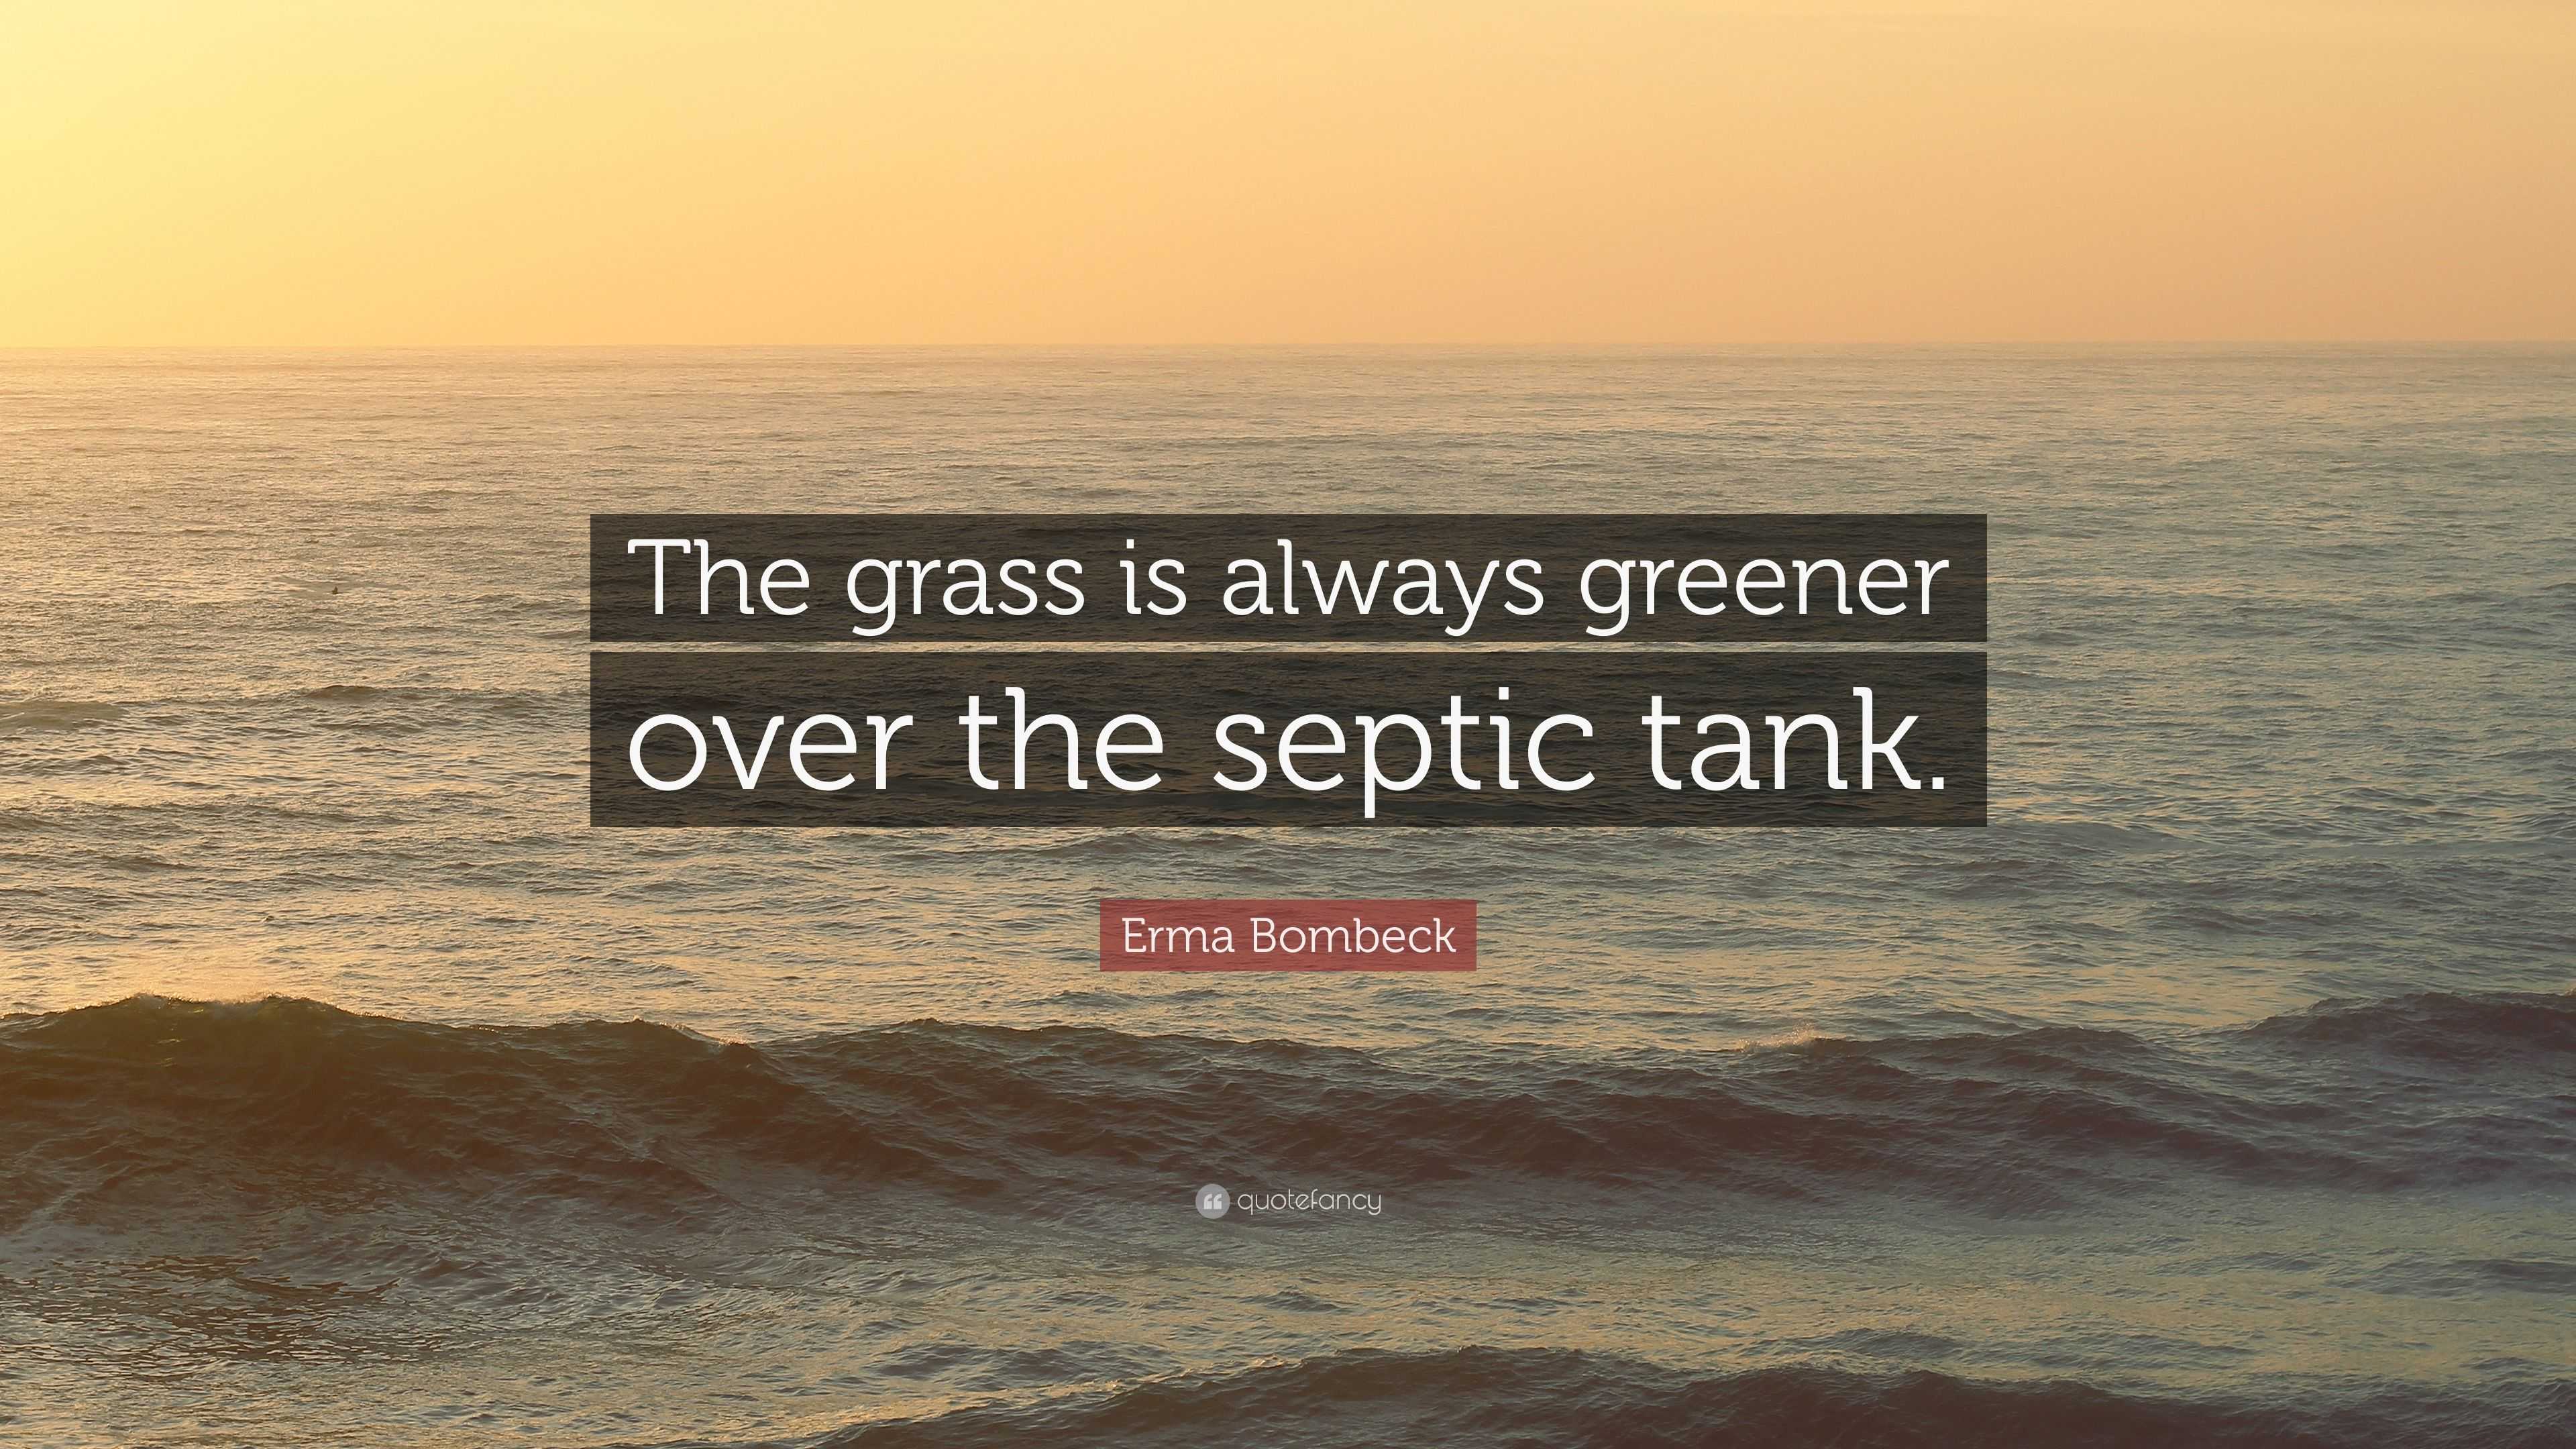 the grass is greener over the septic tank